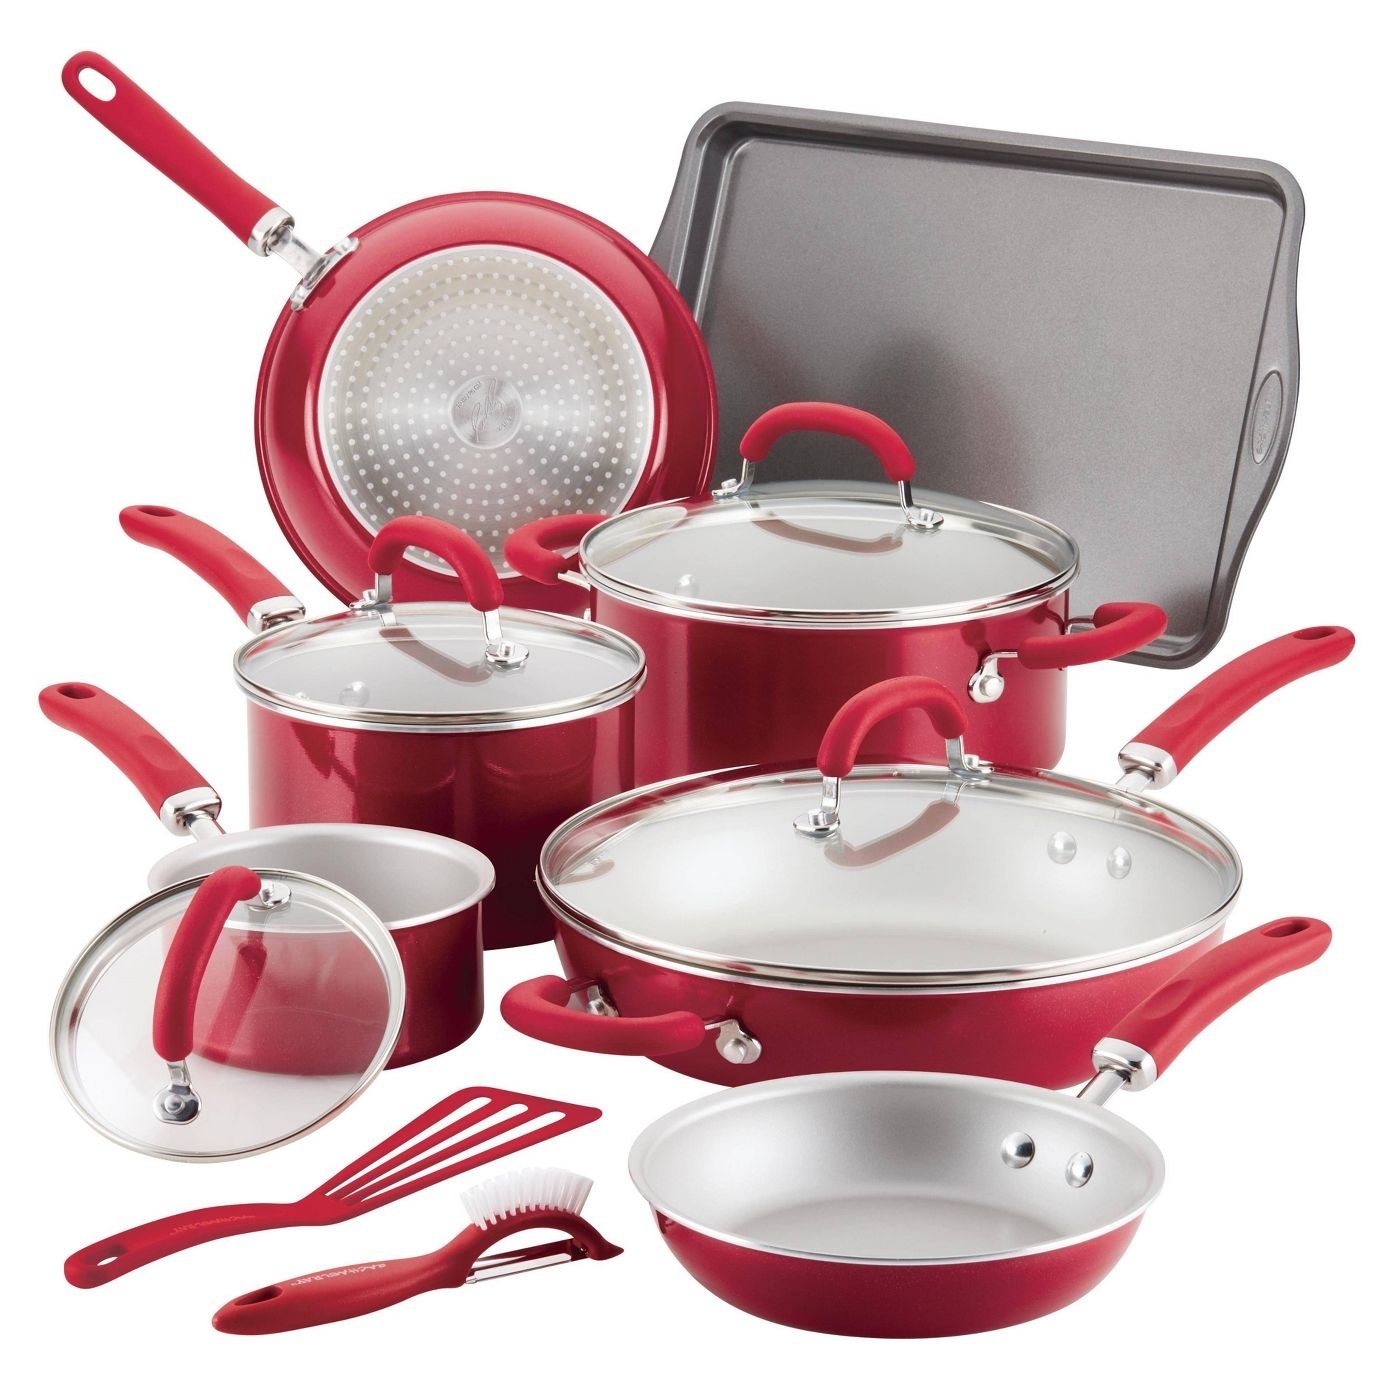 A set of red pots and pans